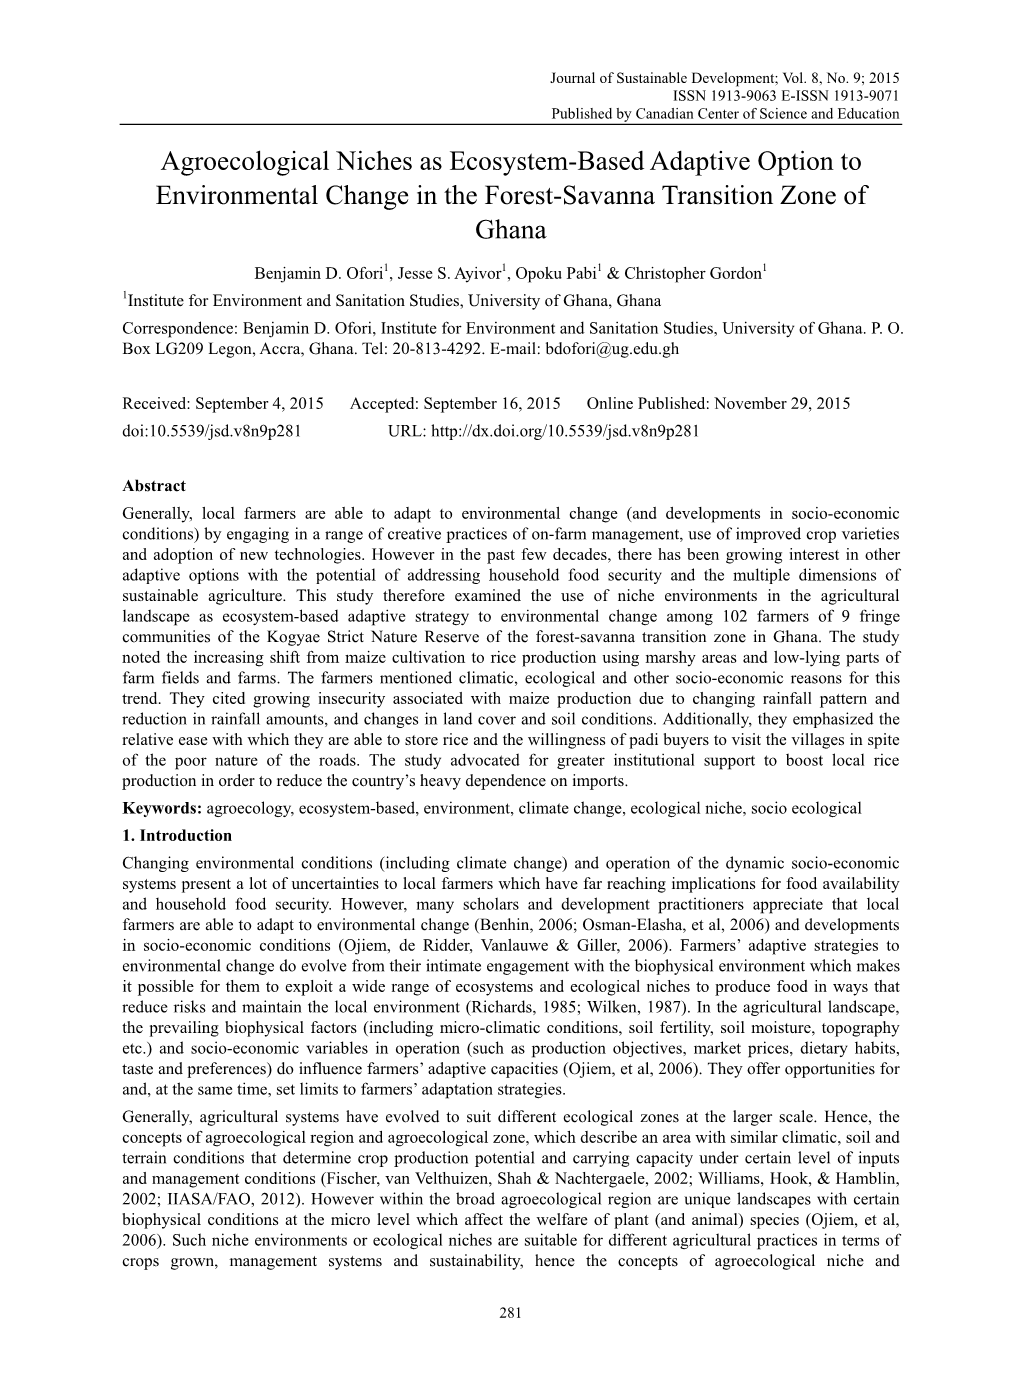 Agroecological Niches As Ecosystem-Based Adaptive Option to Environmental Change in the Forest-Savanna Transition Zone of Ghana